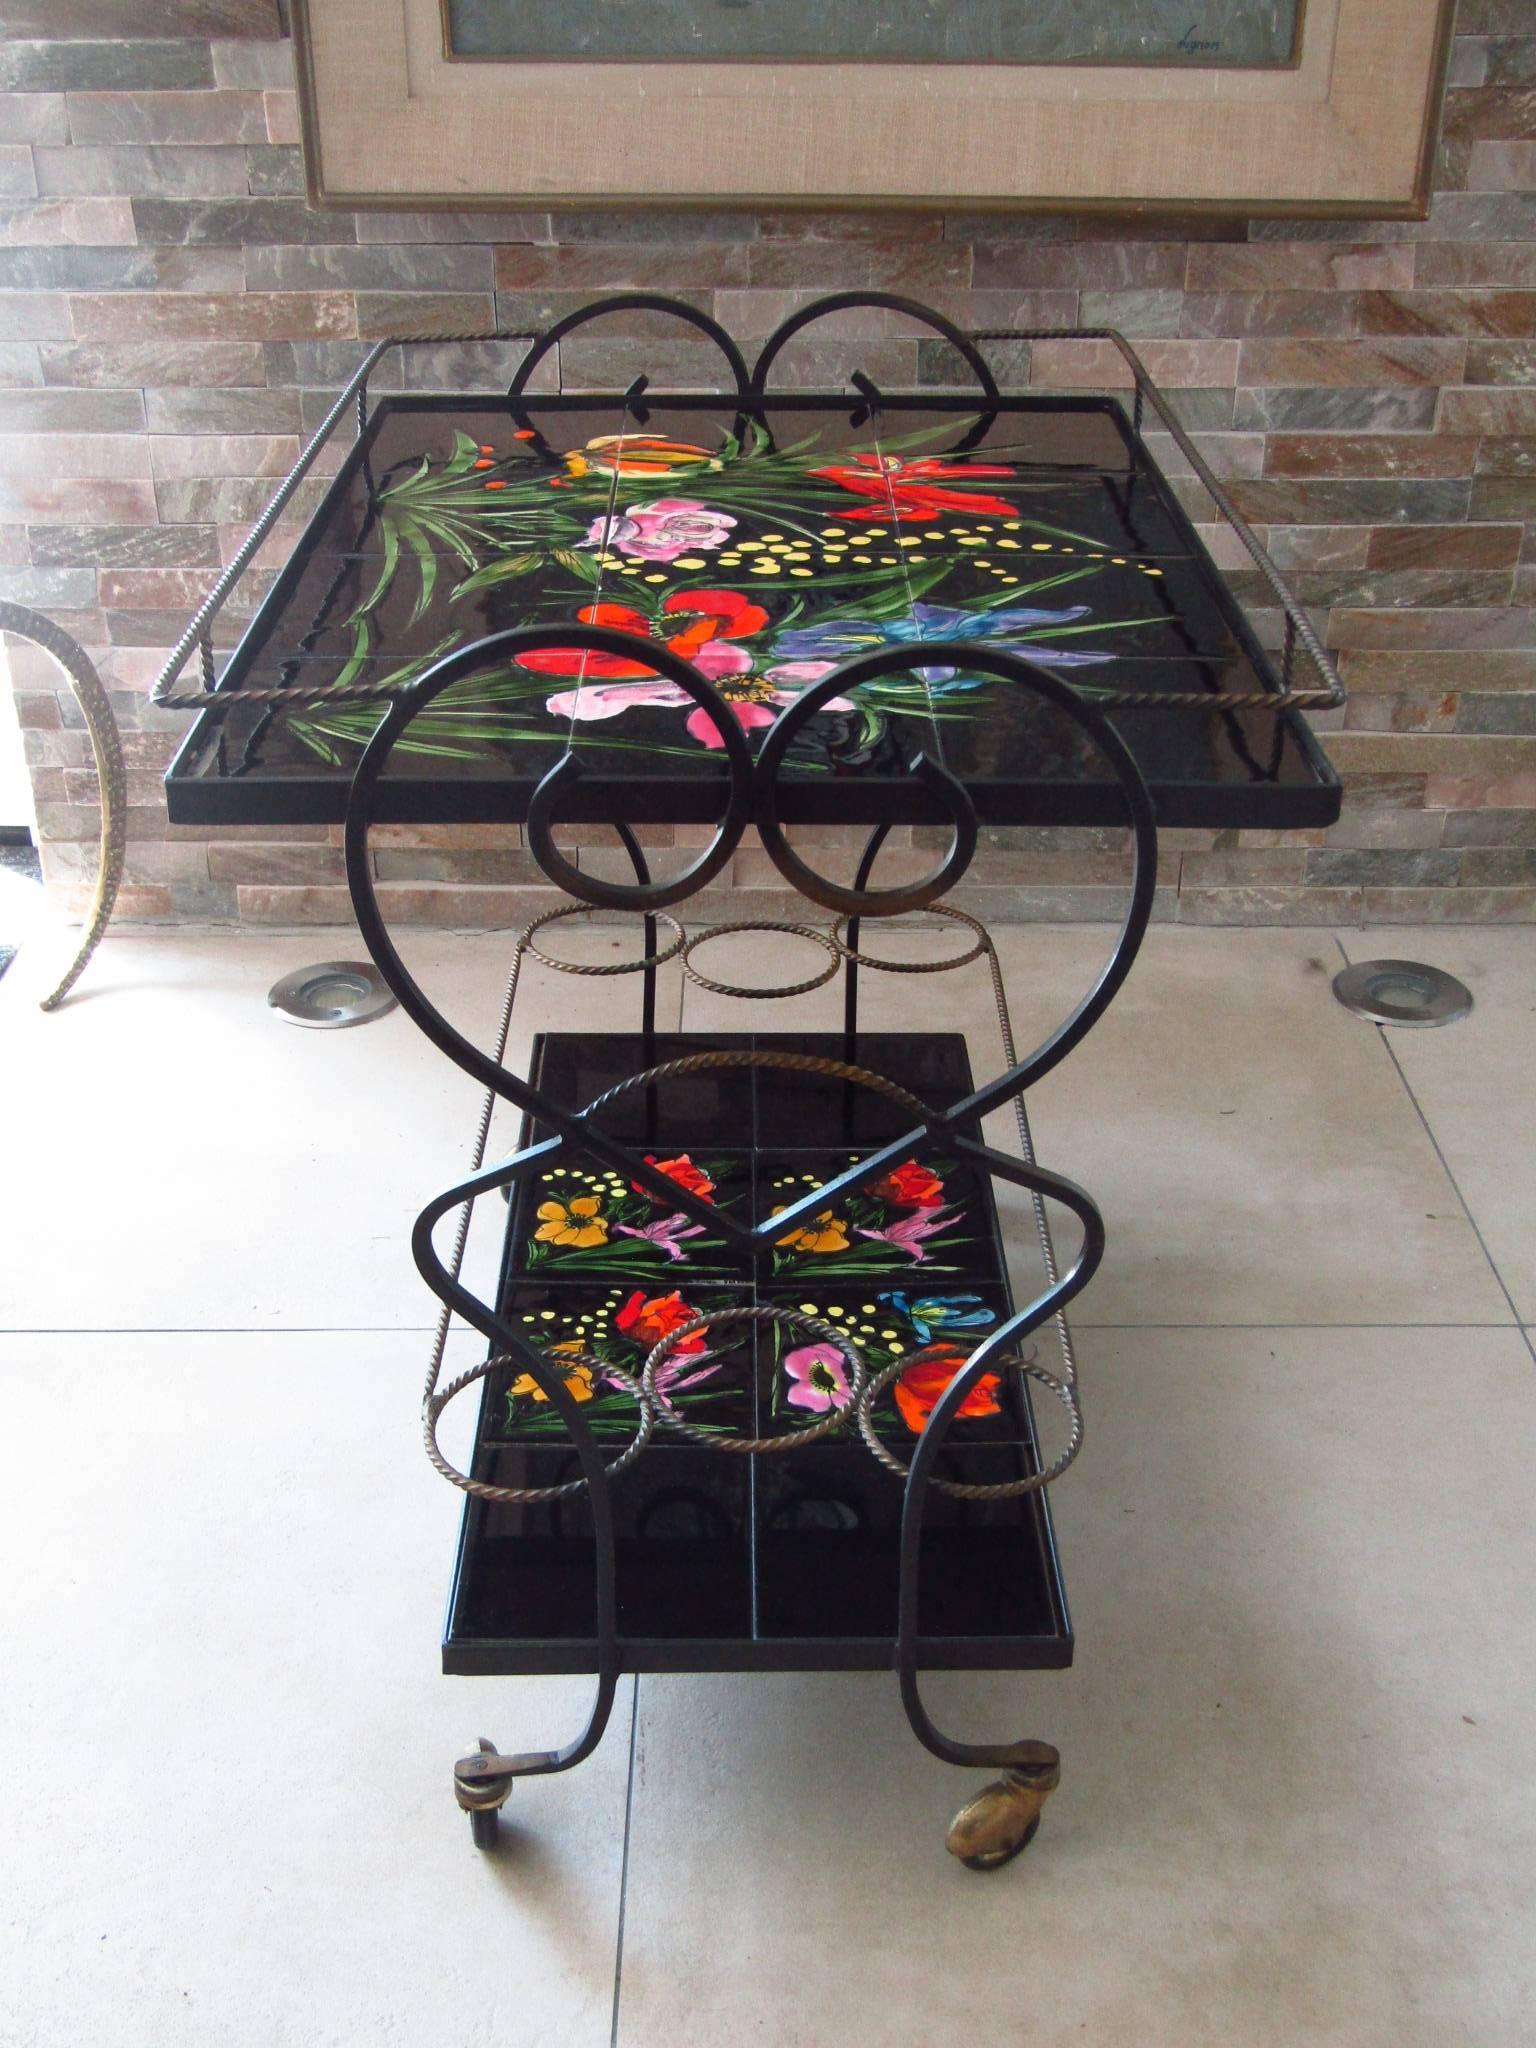 Ceramic Midcentury Bar Cart Tiles and Wrought Iron, Vallauris France, 1950s For Sale